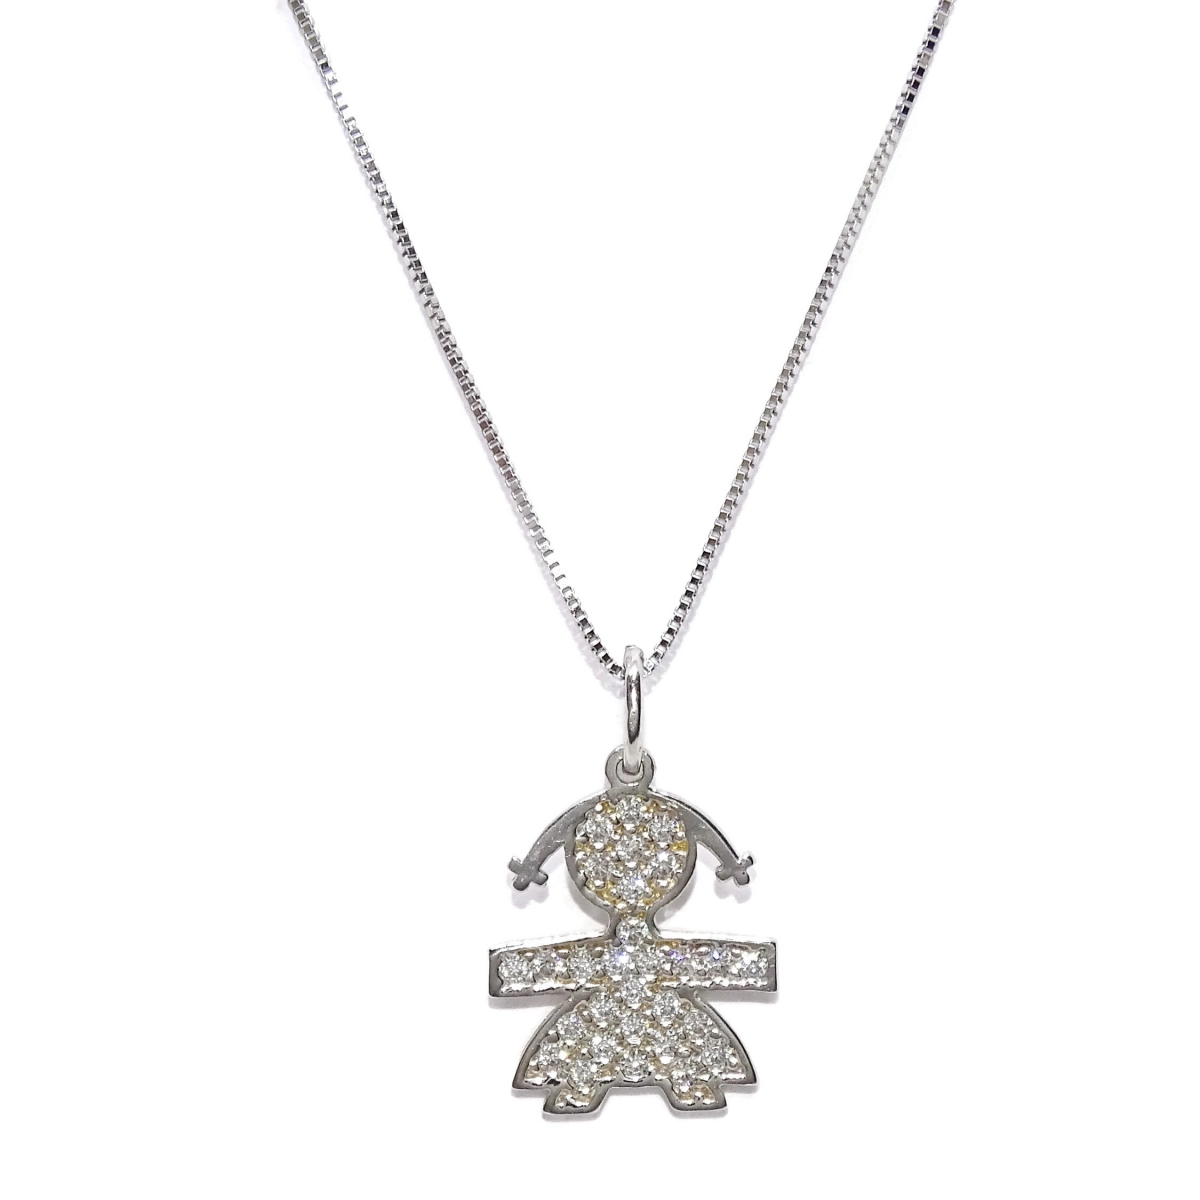 PENDANT OR�OF WHITE GOLD 18K WITH ZIRCONS OF THE HIGHEST QUALITY AND STRING VENETIAN 40CM NEVER SAY NEVER